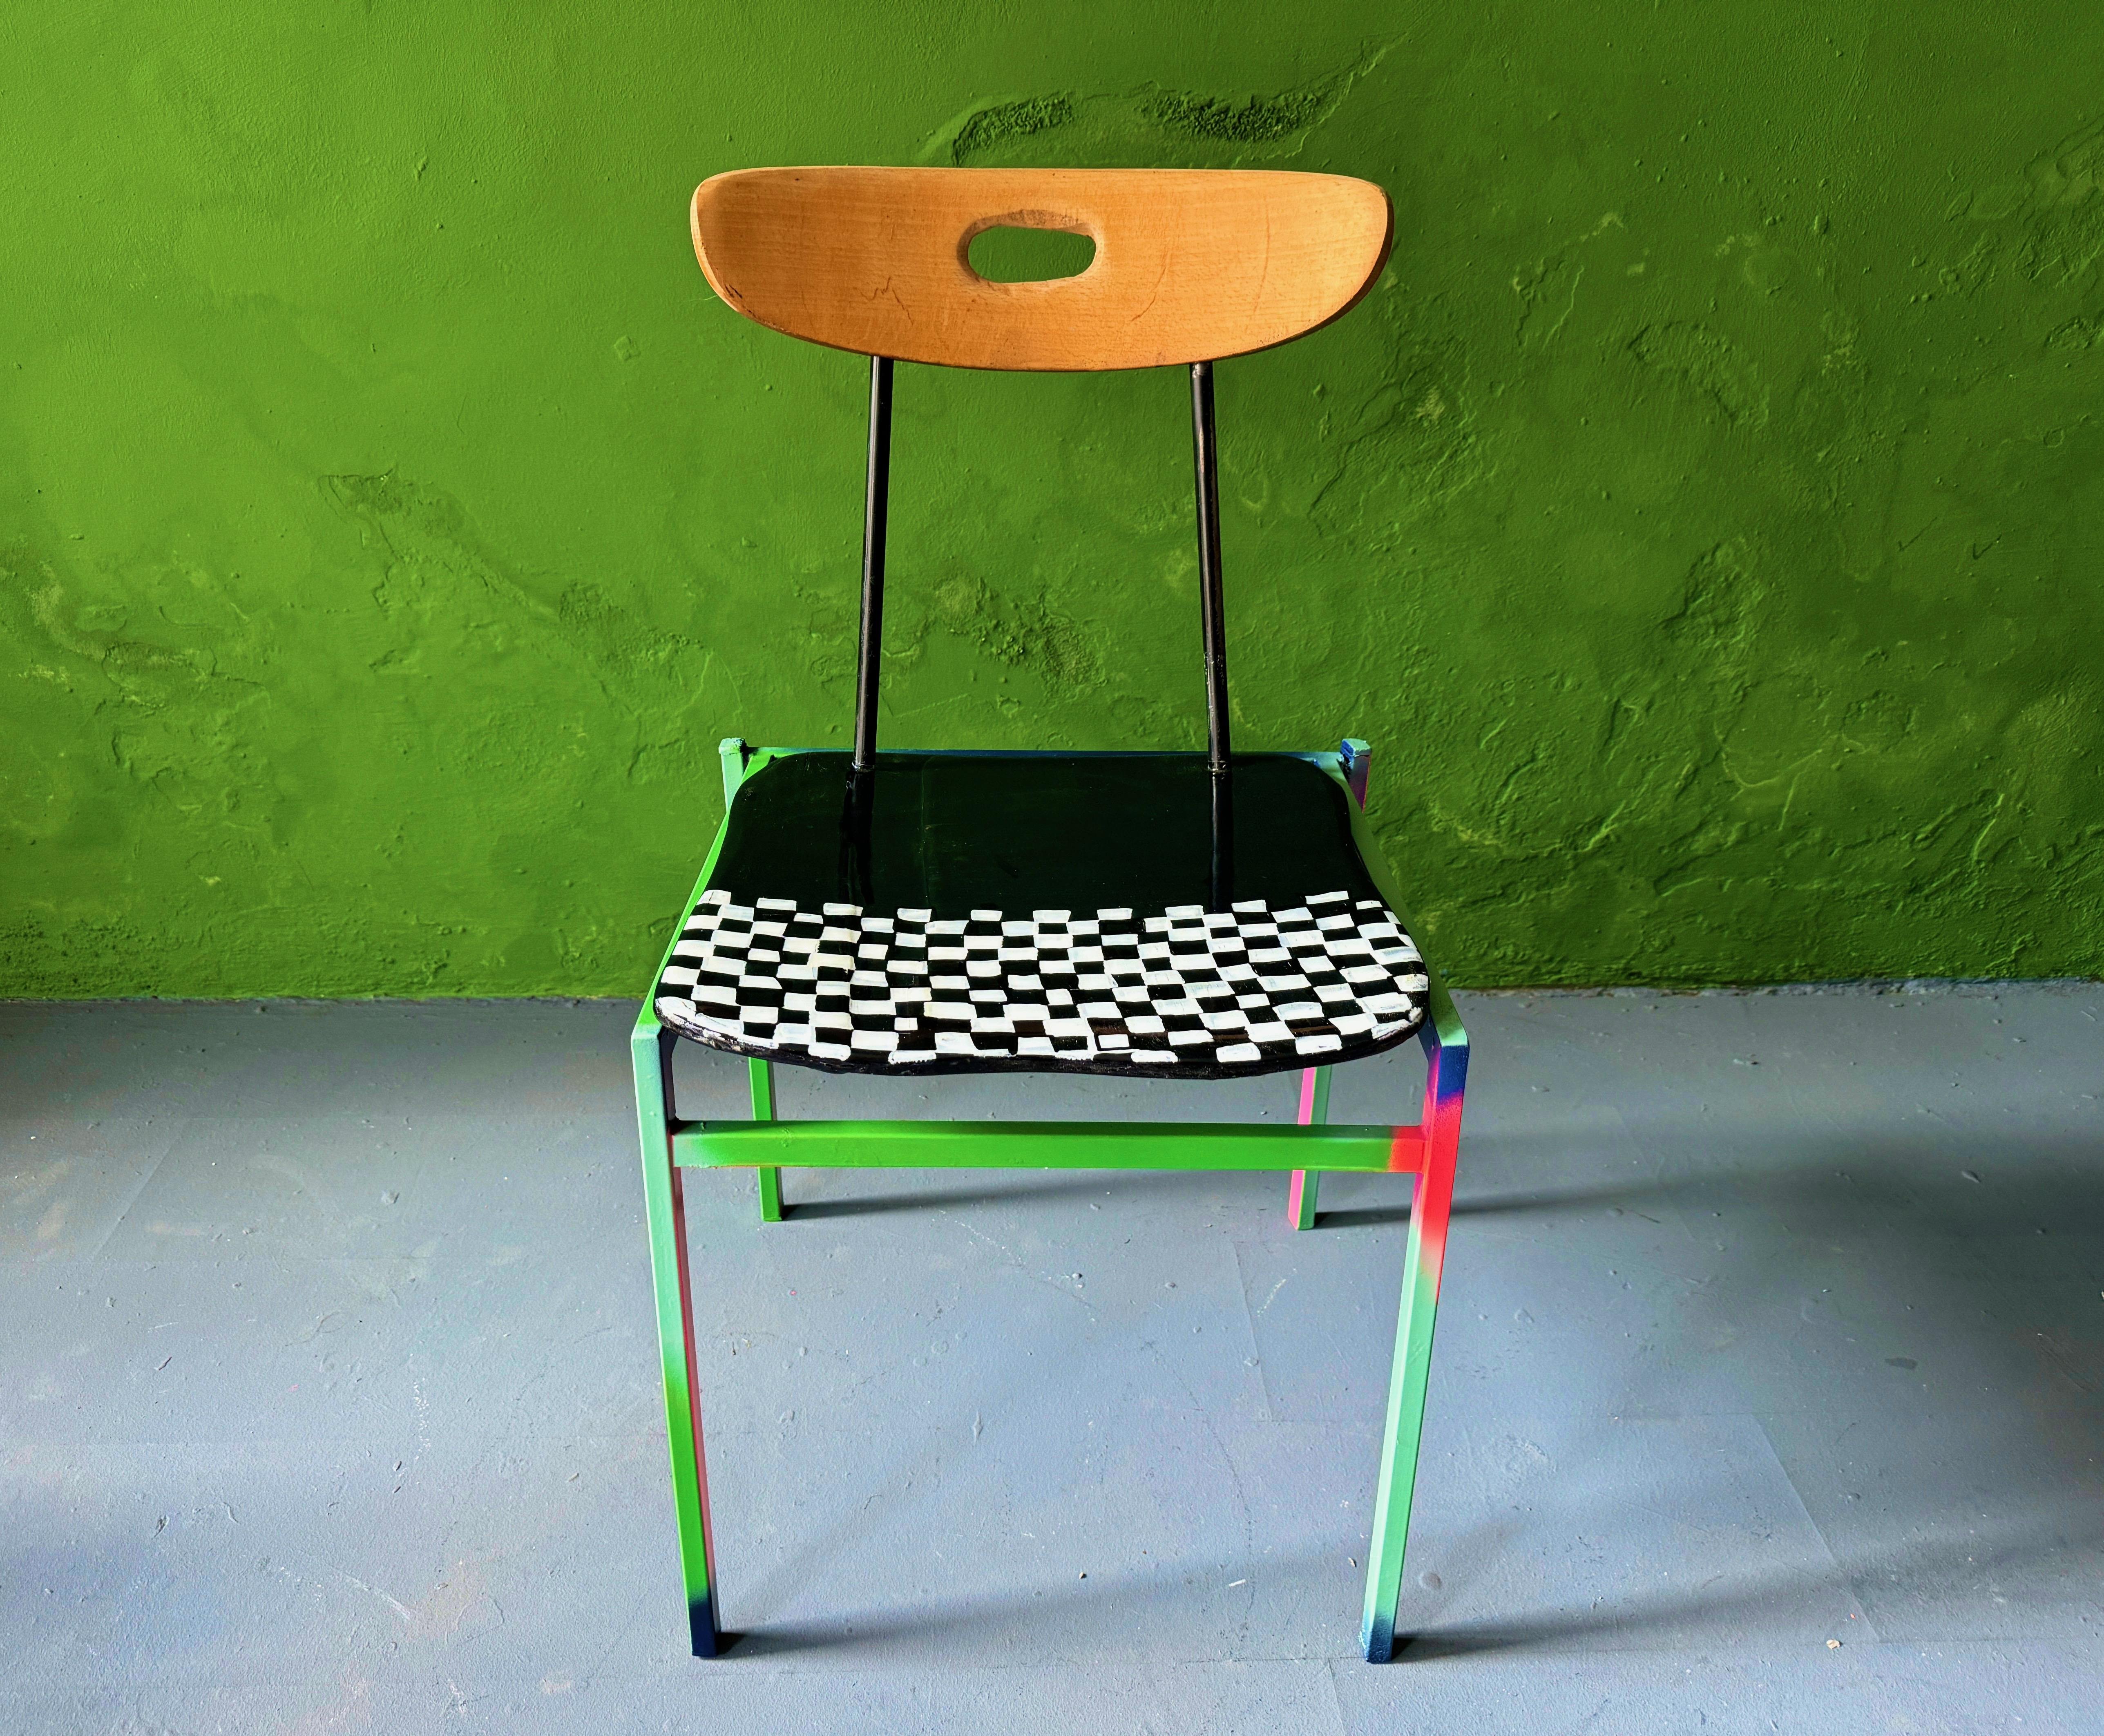 Combination of two typical 1950's chairs. Spraypainted, painted and multi-lacquered.
•	Info about Markus F. Staab
•	born 1964 in Aschaffenburg, Germany
•	since  1986 active as a visual artist 
•	since  1989 national and international